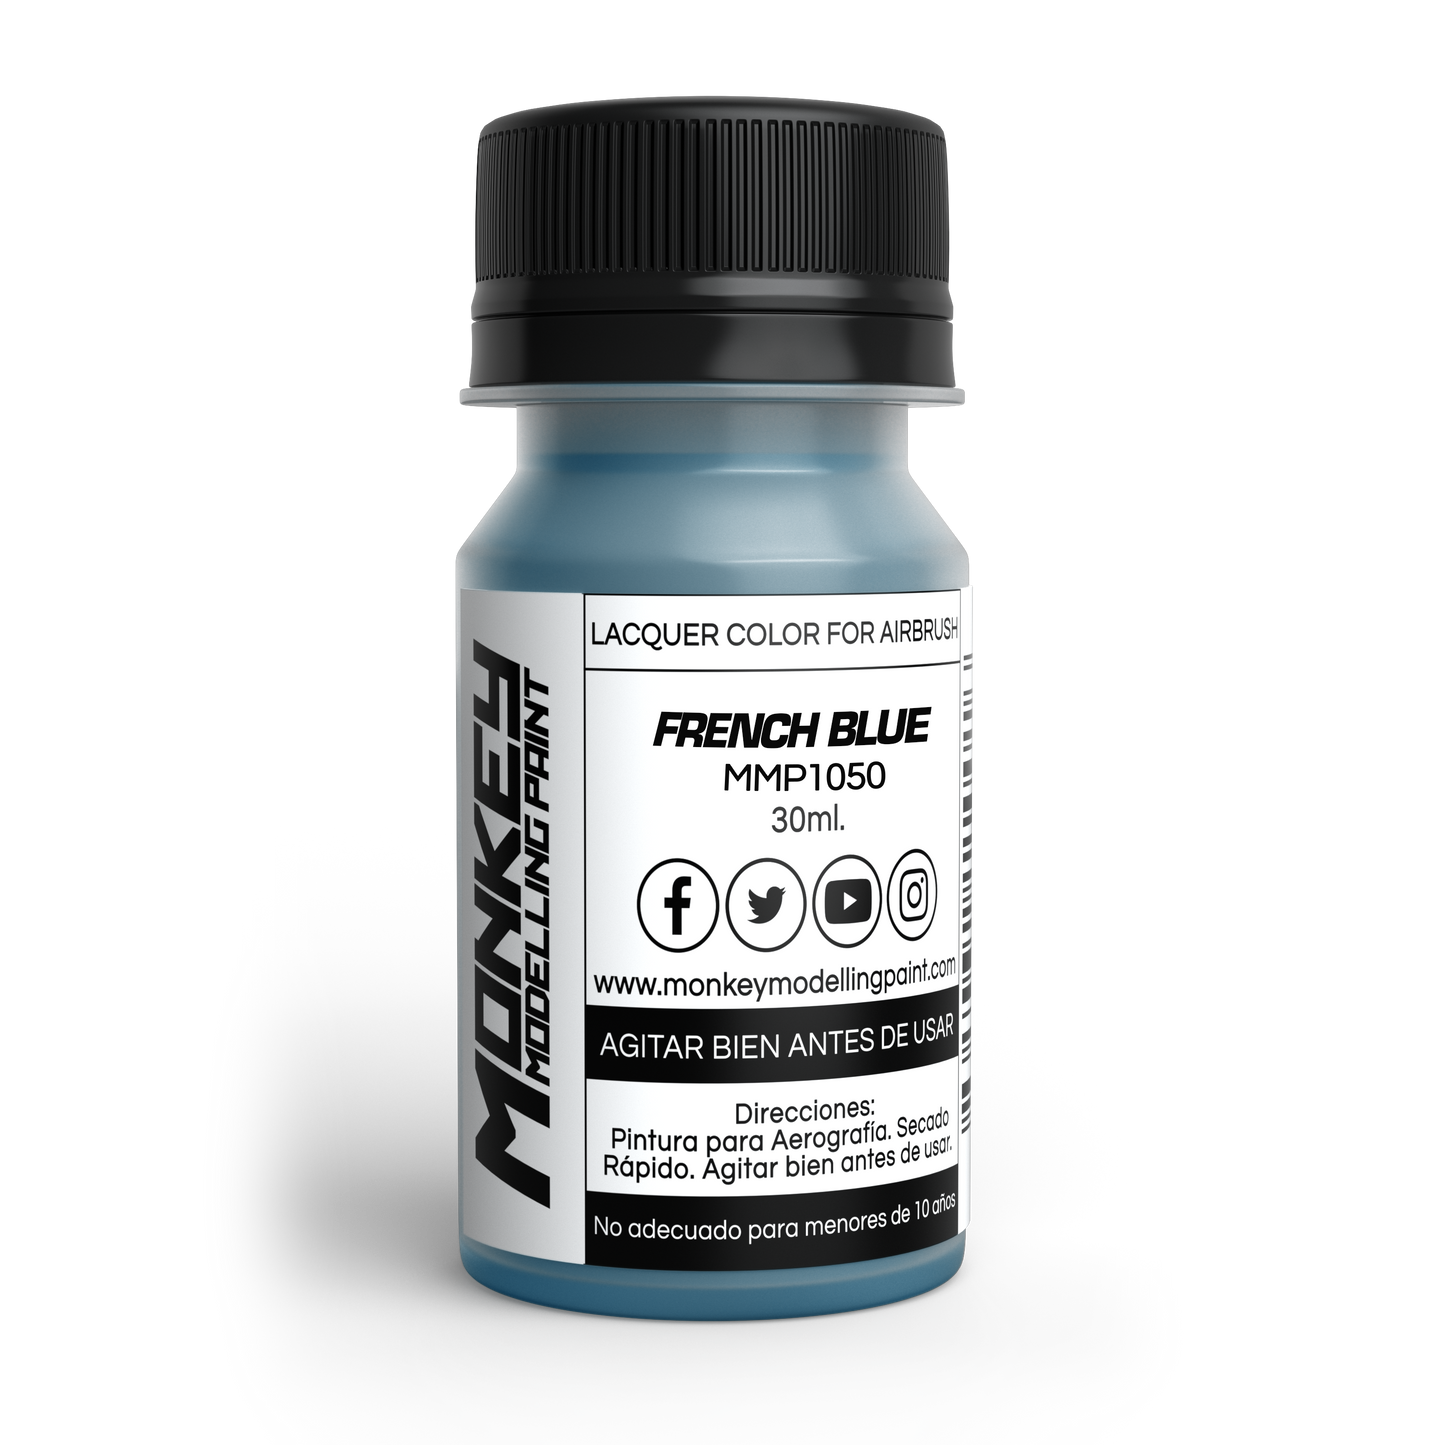 MMP BLUE FRANCAIS / FRENCH BLUE